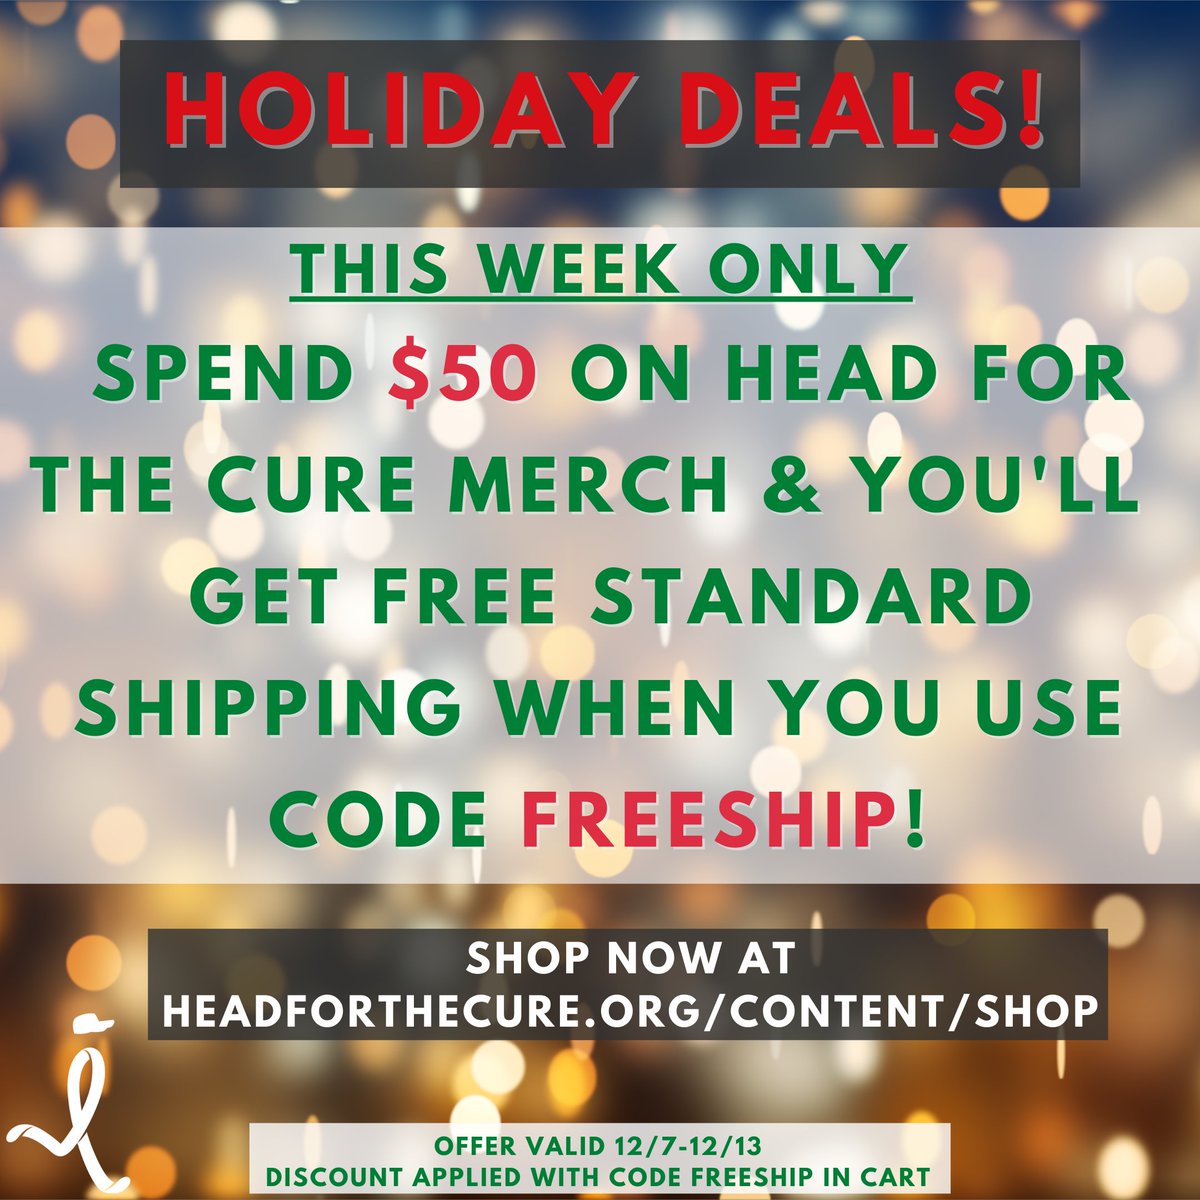 Don't miss this week's Holiday Deal!! Spend $50 or more at our online store and you'll receive FREE standard shipping when you use code FREESHIP! Proceeds from our merchandise sales support the fight against brain cancer! 

Shop at headforthecure.org/content/shop! #WearYourSupport #HFTC